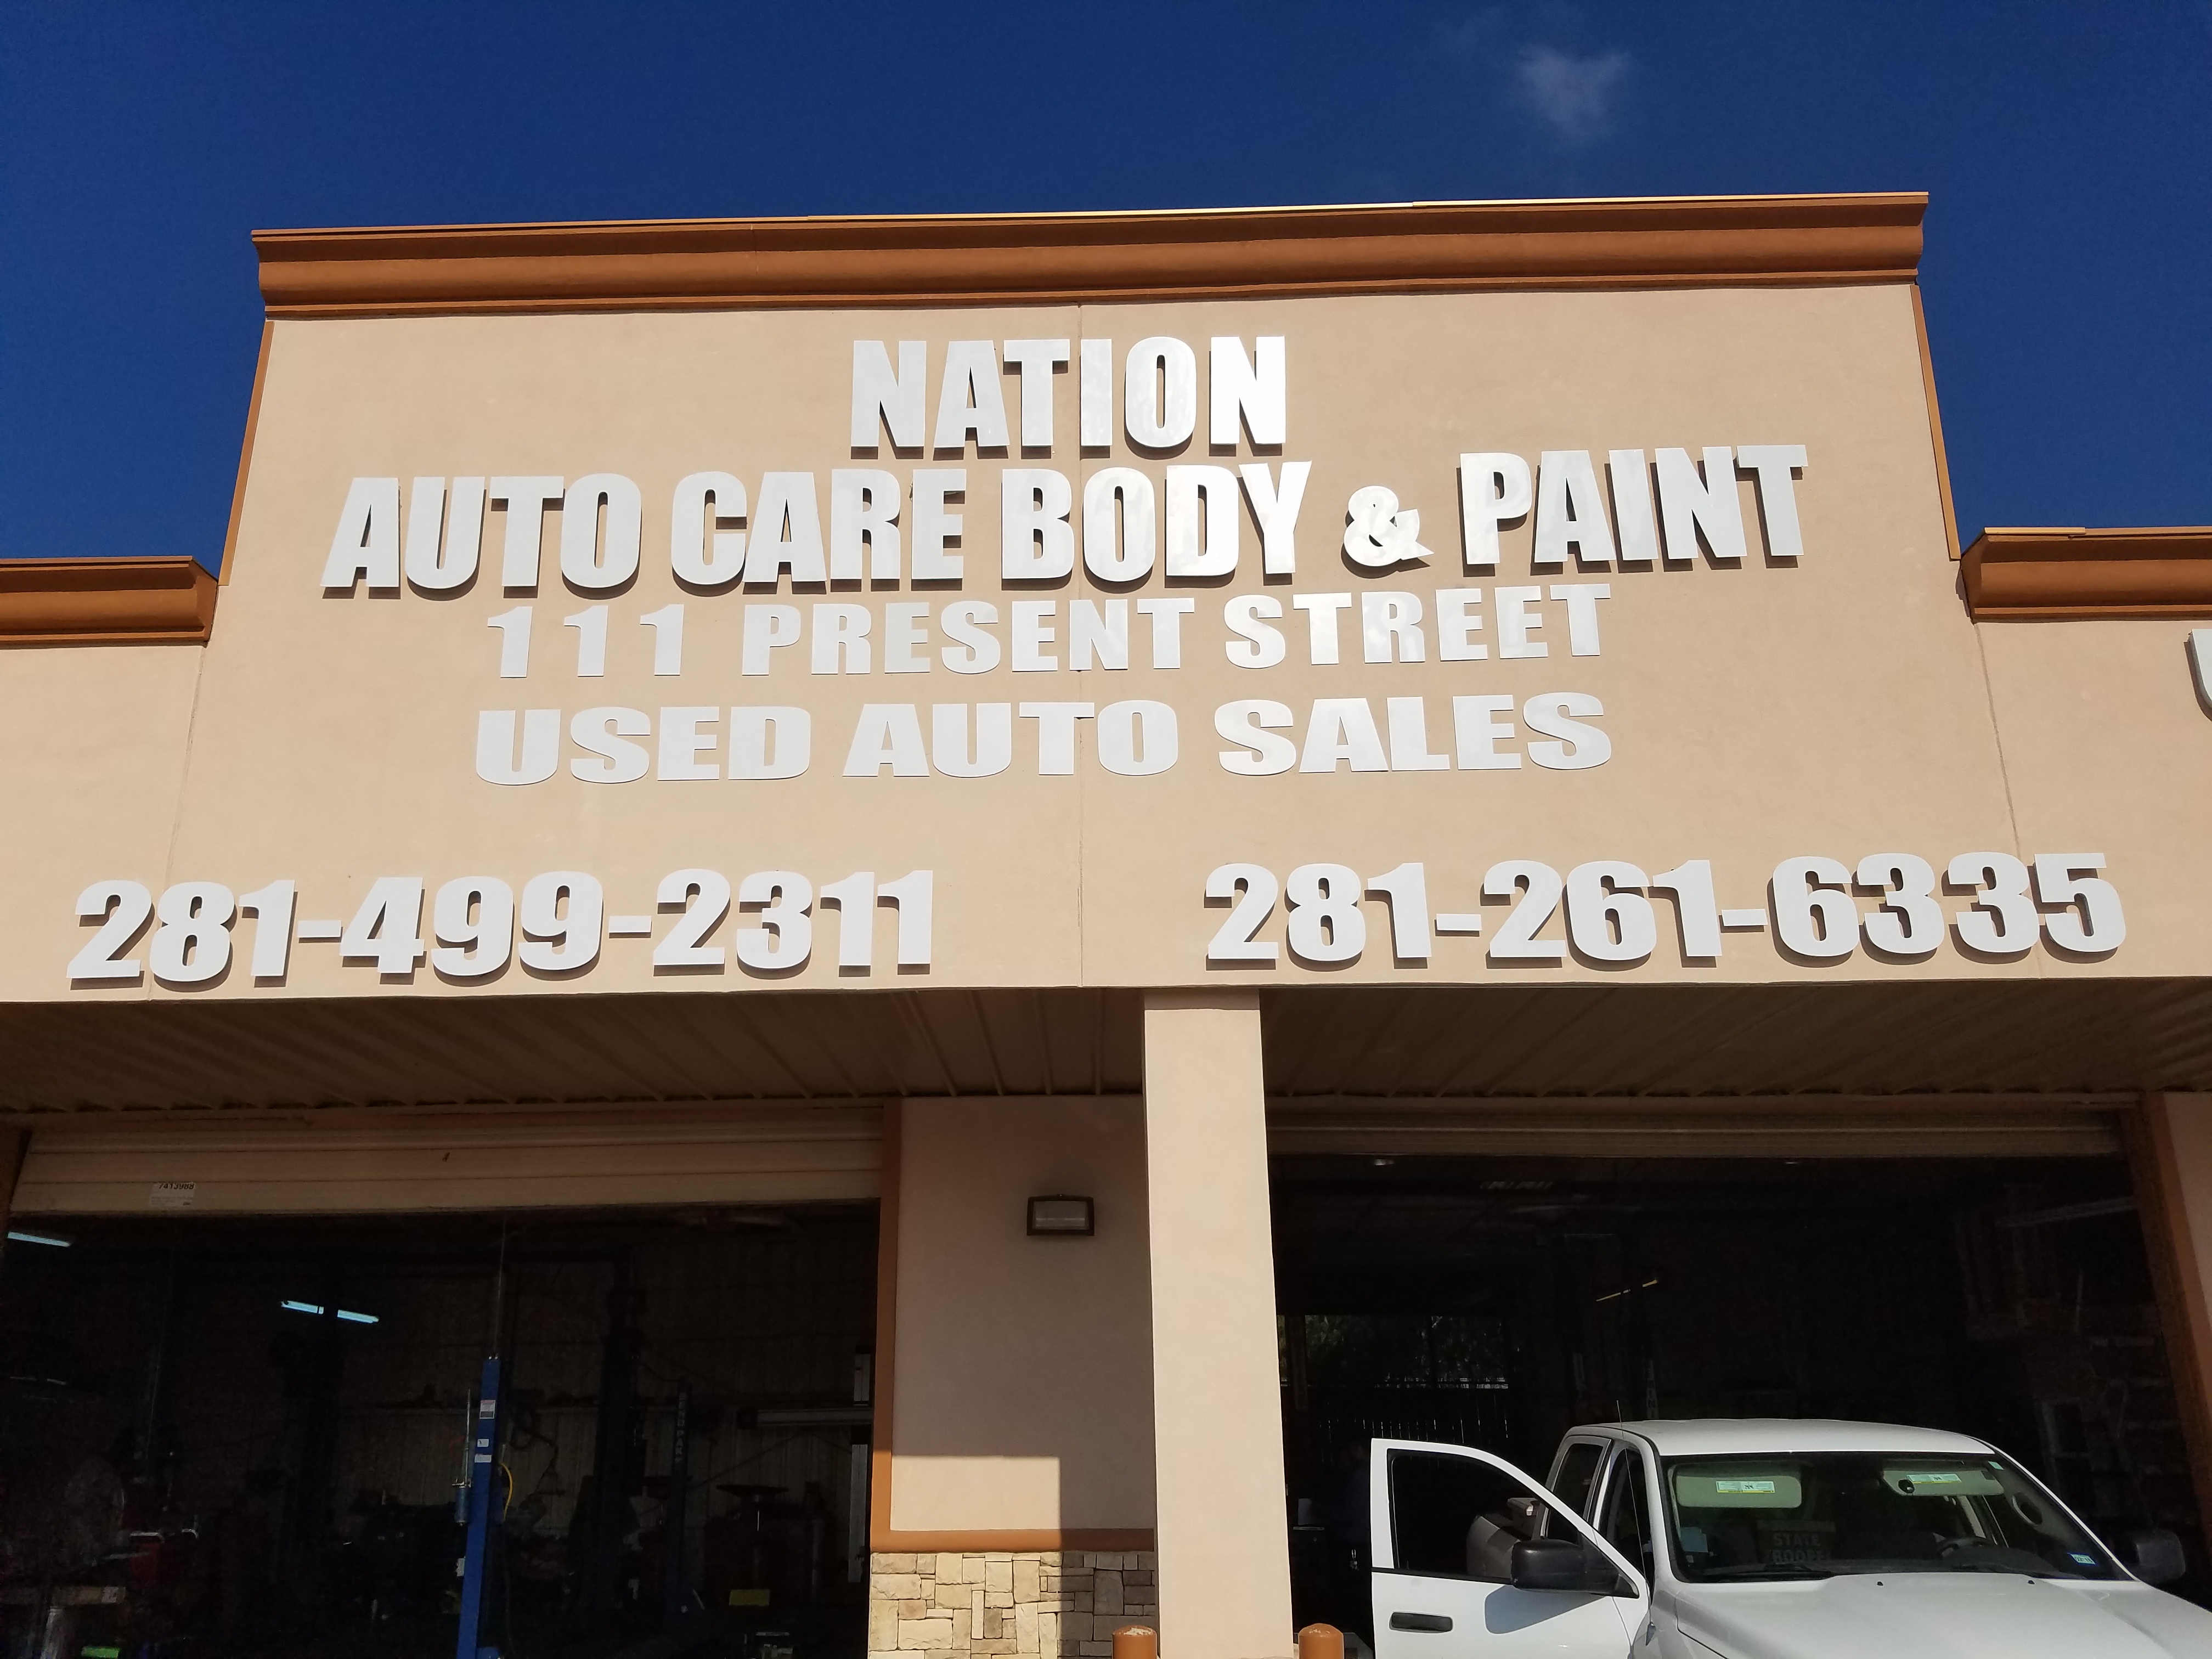 Nations Auto Care Body & Paint Photo